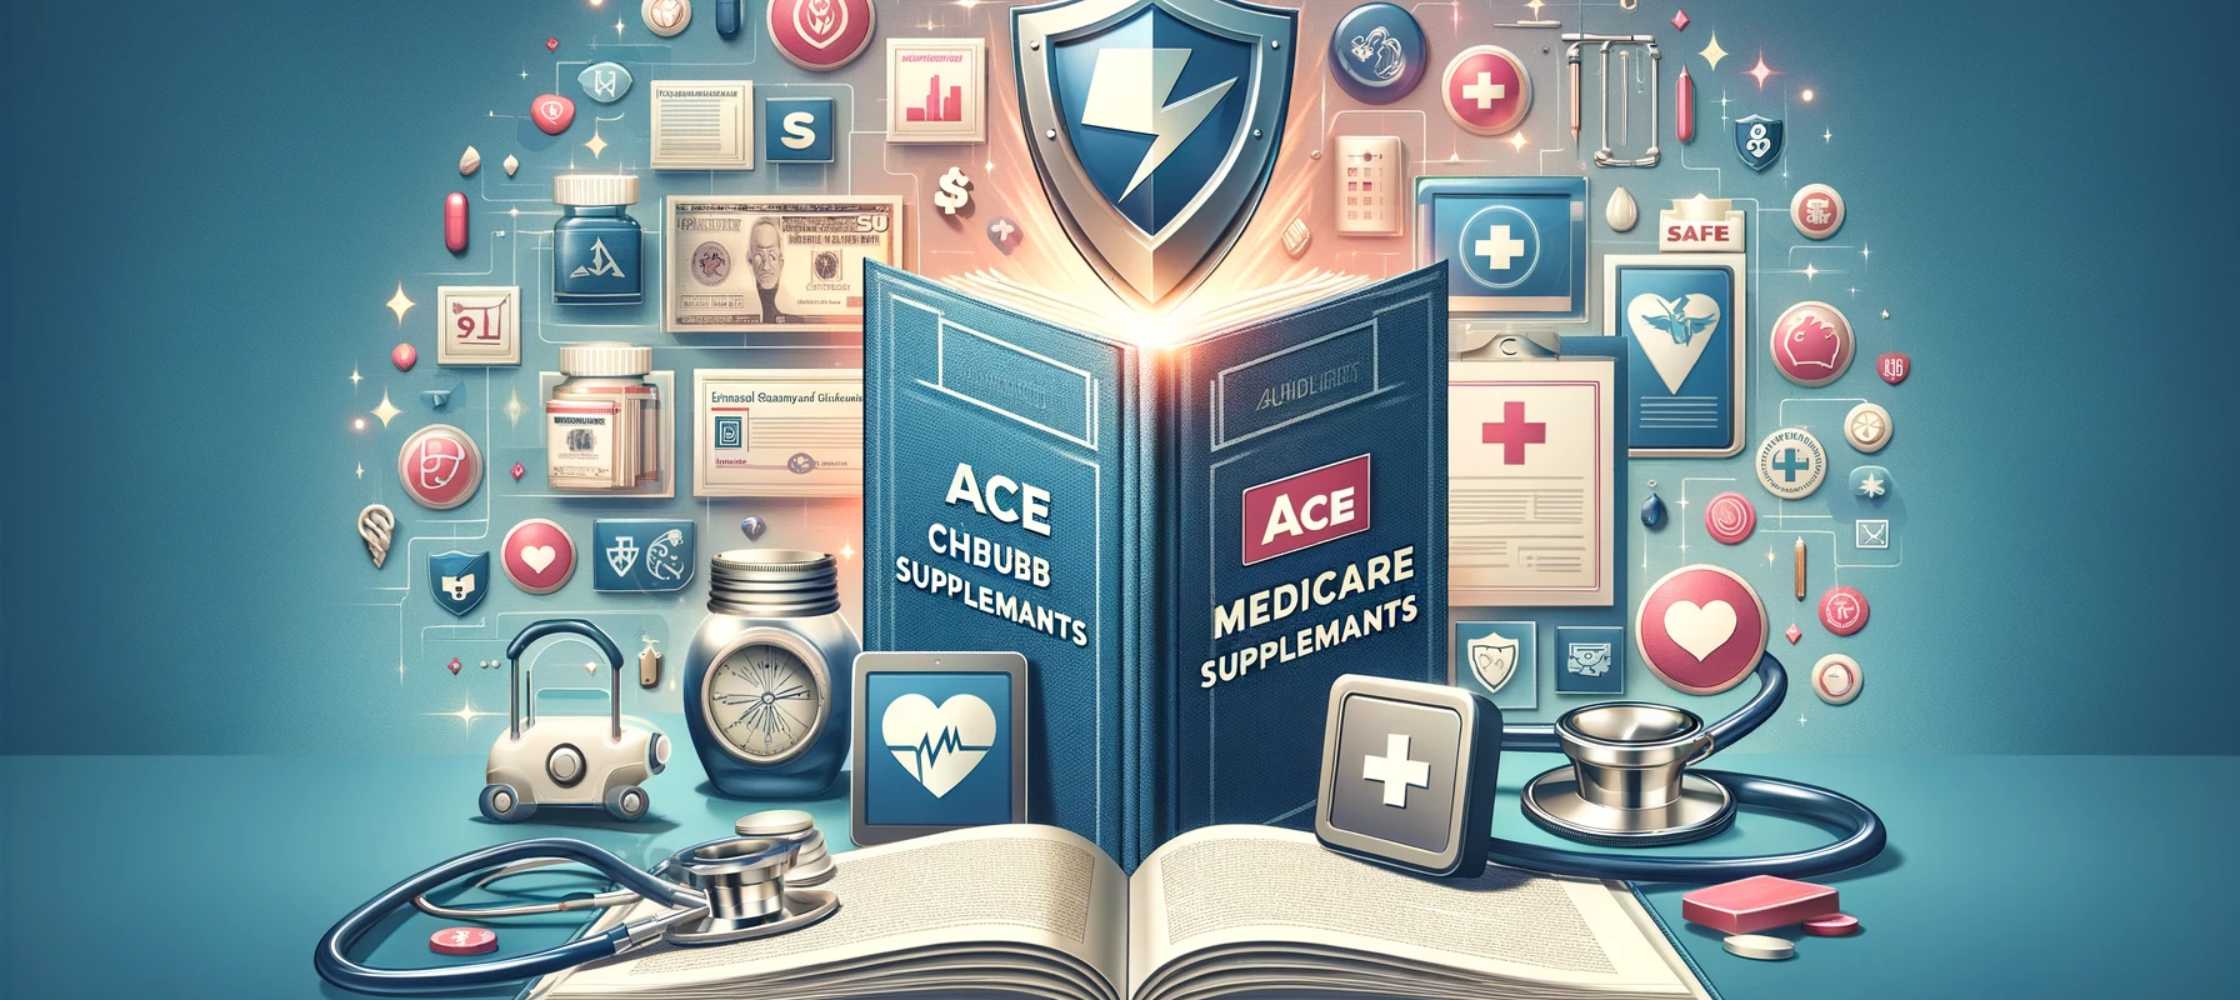 ACE Chubb Medicare Supplement